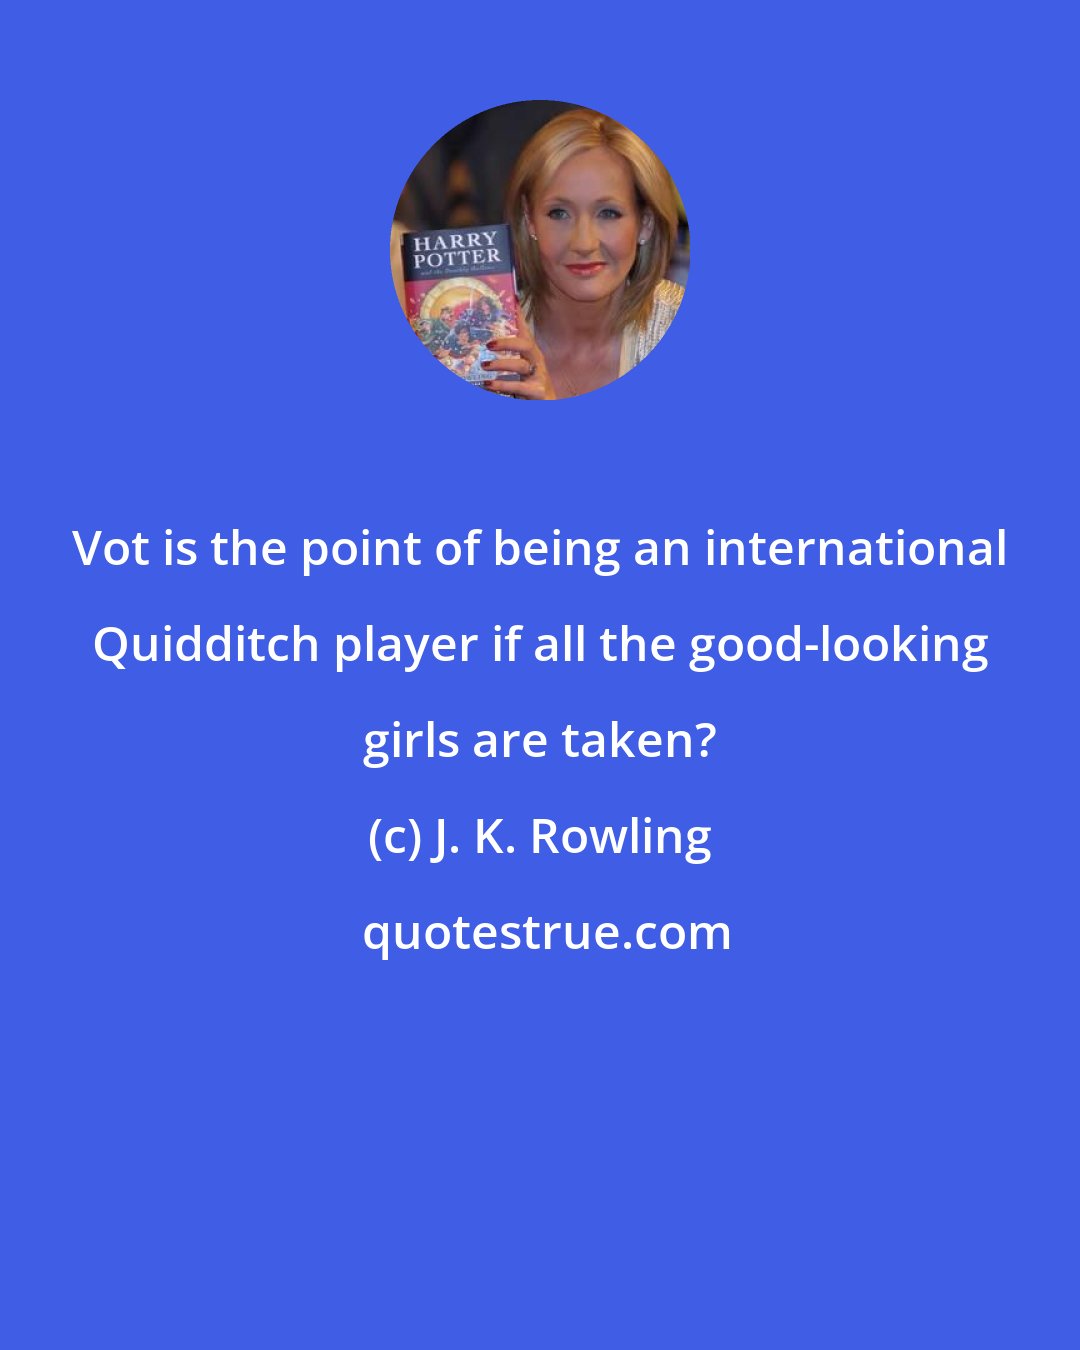 J. K. Rowling: Vot is the point of being an international Quidditch player if all the good-looking girls are taken?